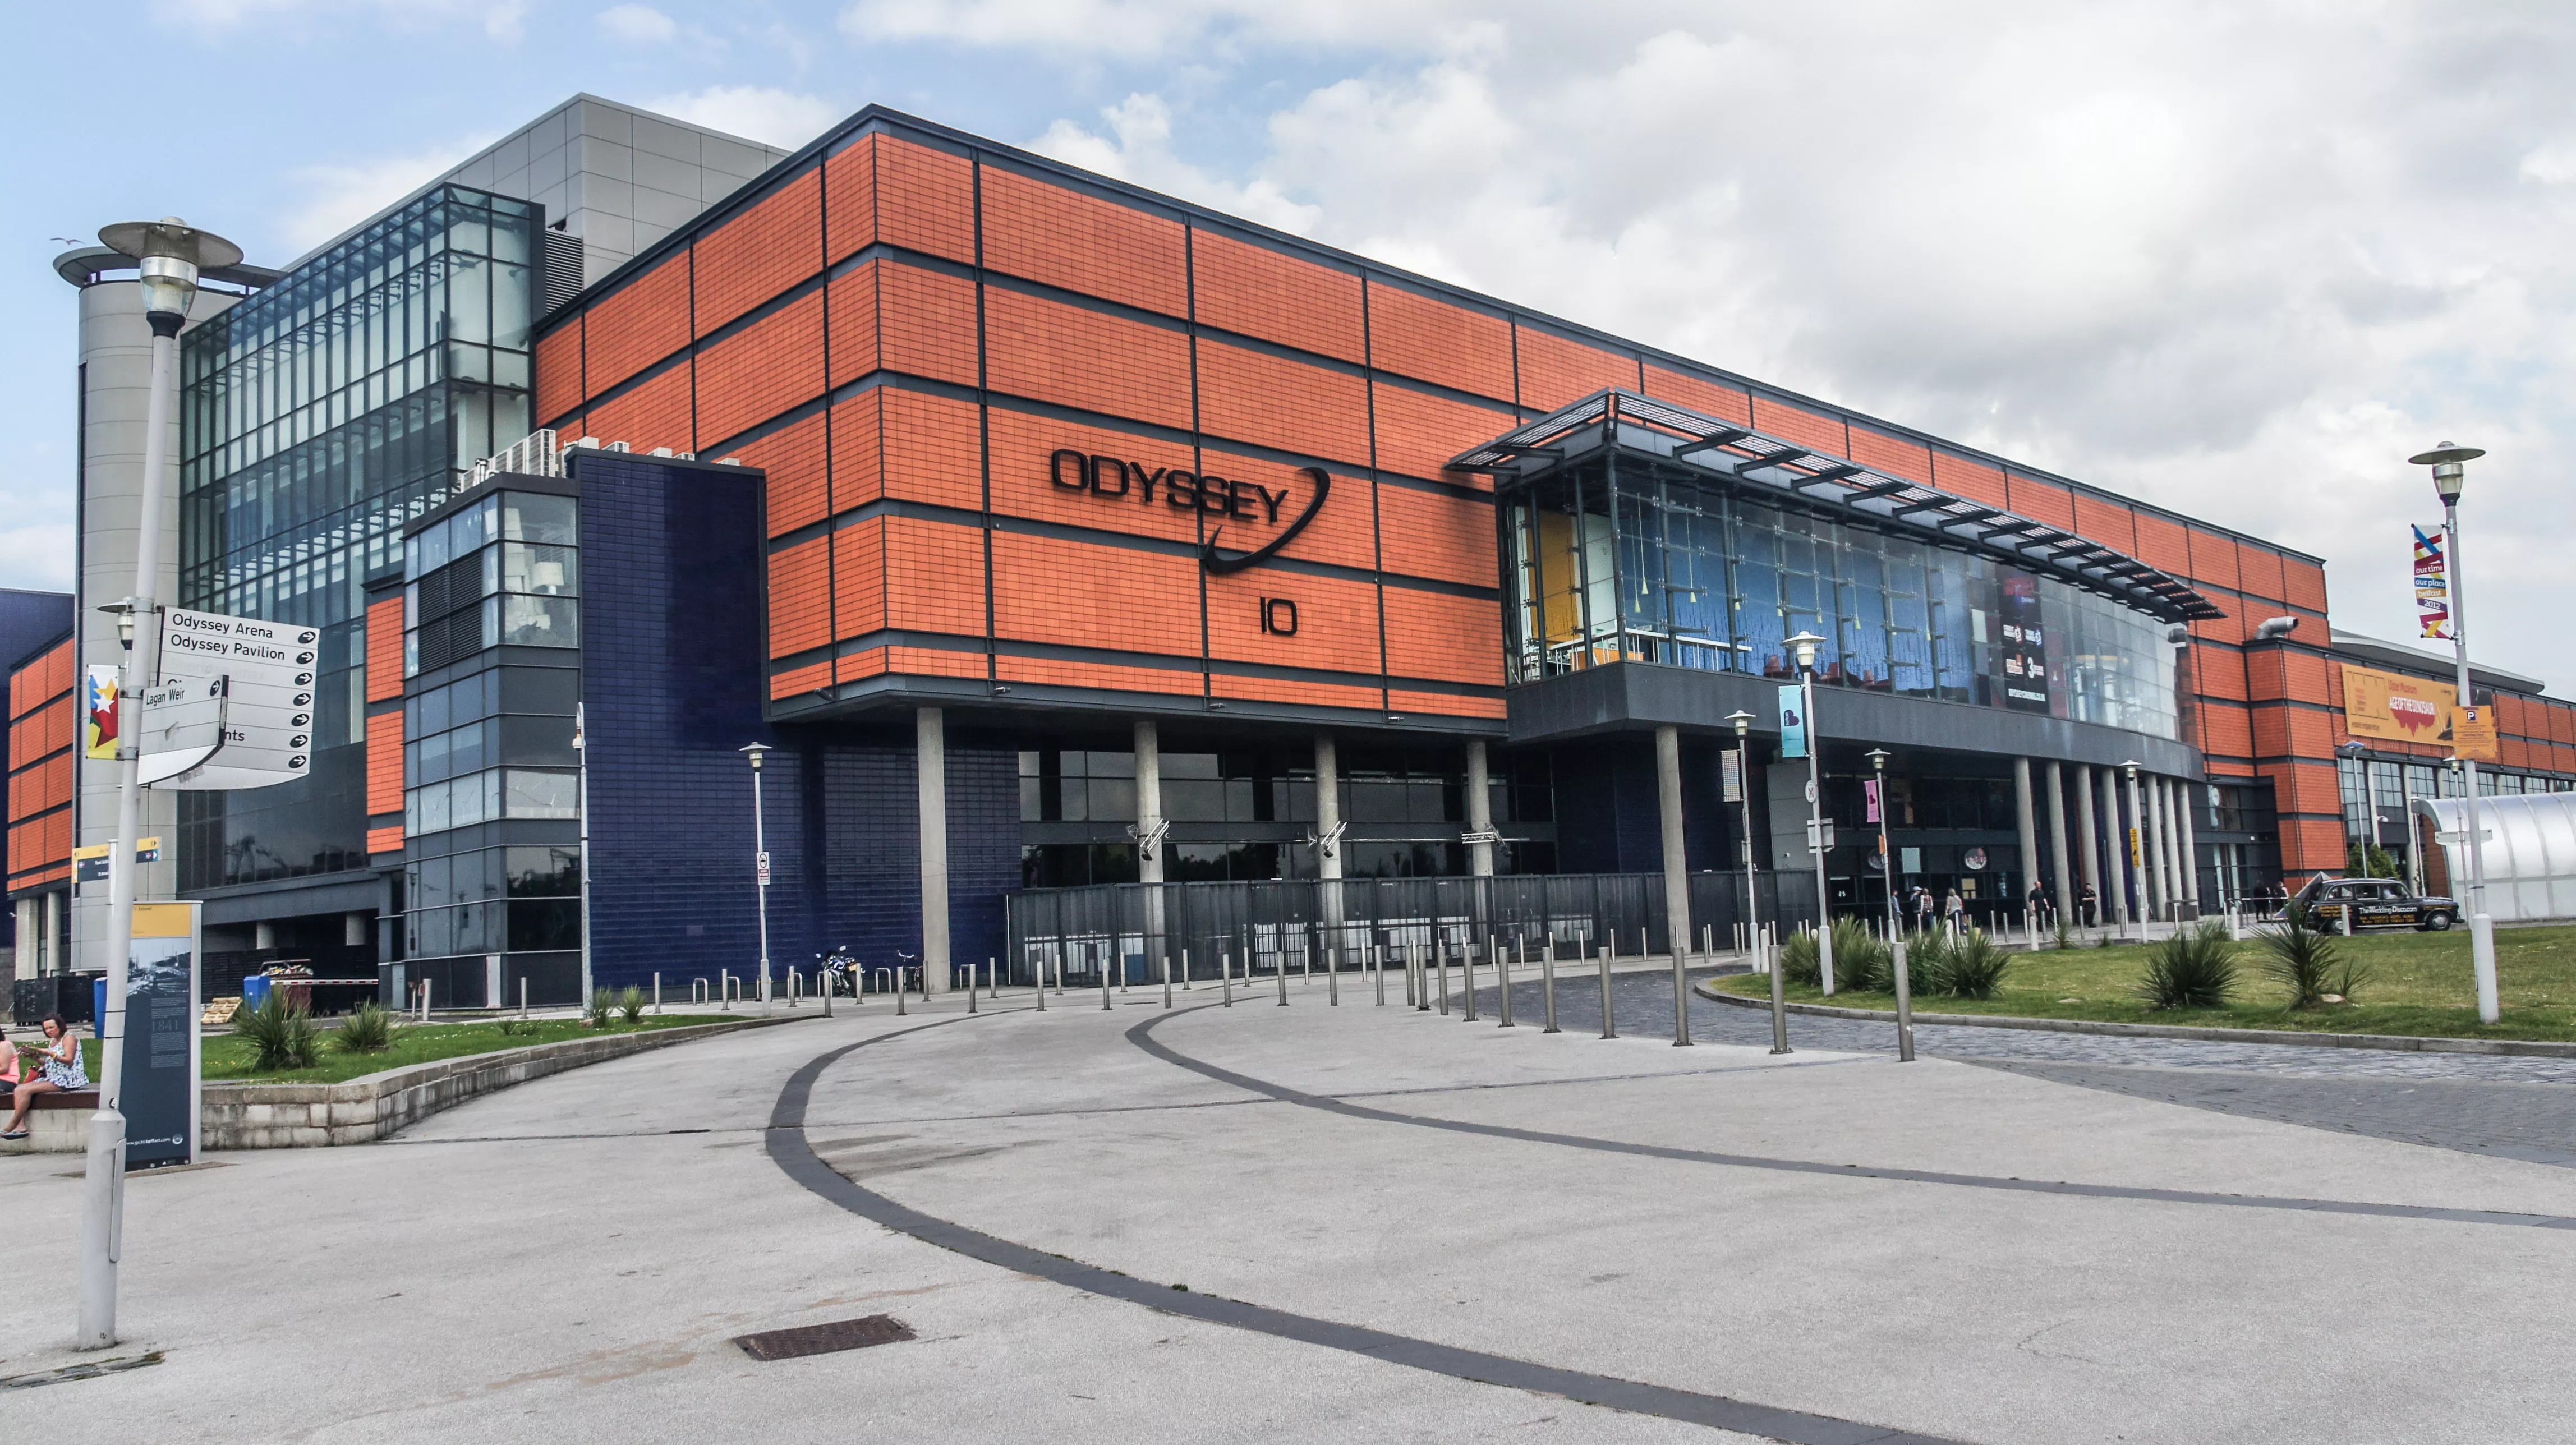 Odyssey Arena in United Kingdom, Europe | Hockey - Rated 4.2